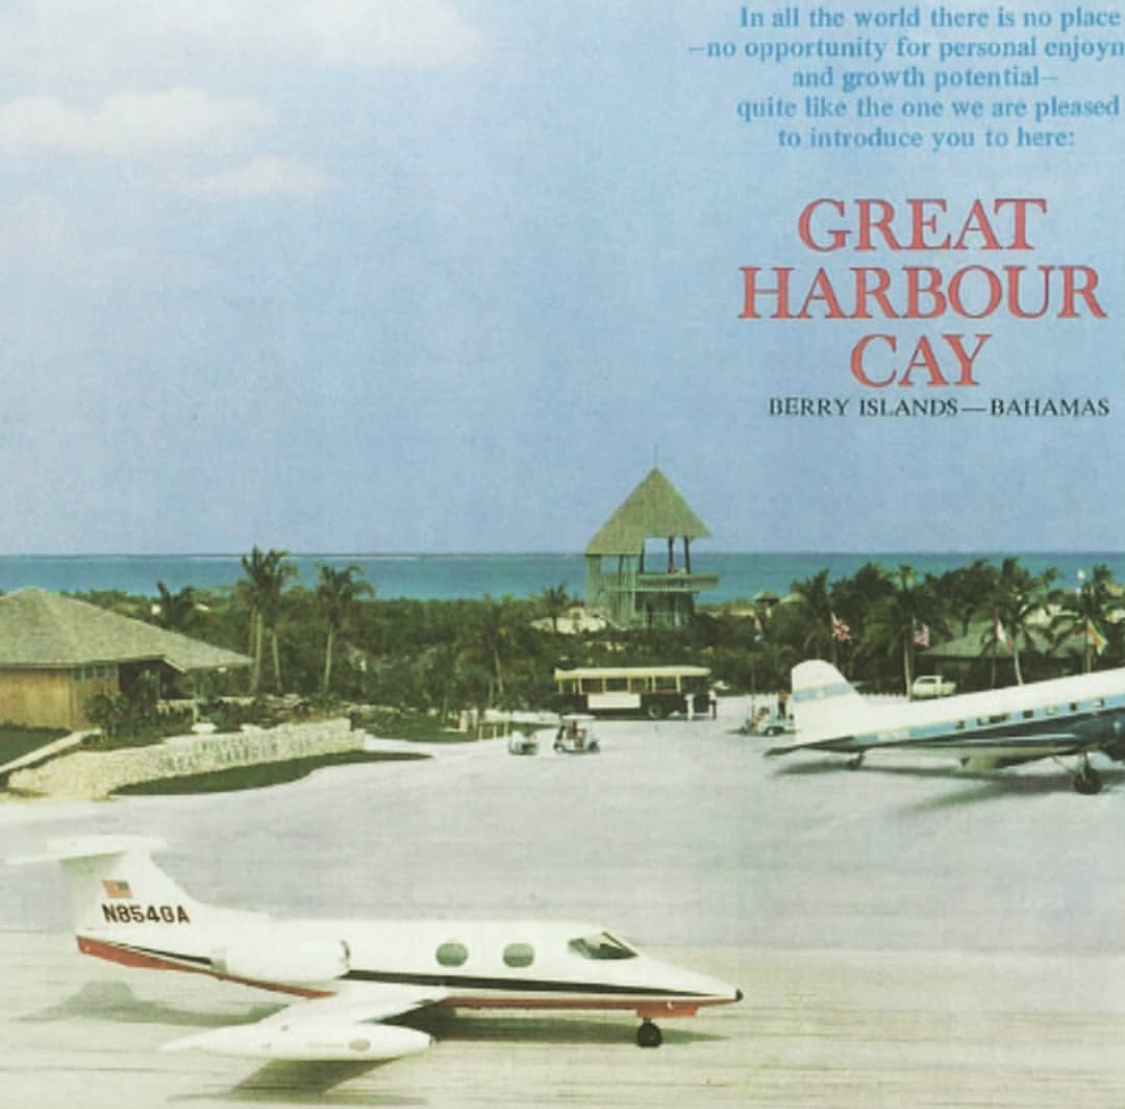 Great Harbour Cay Airport